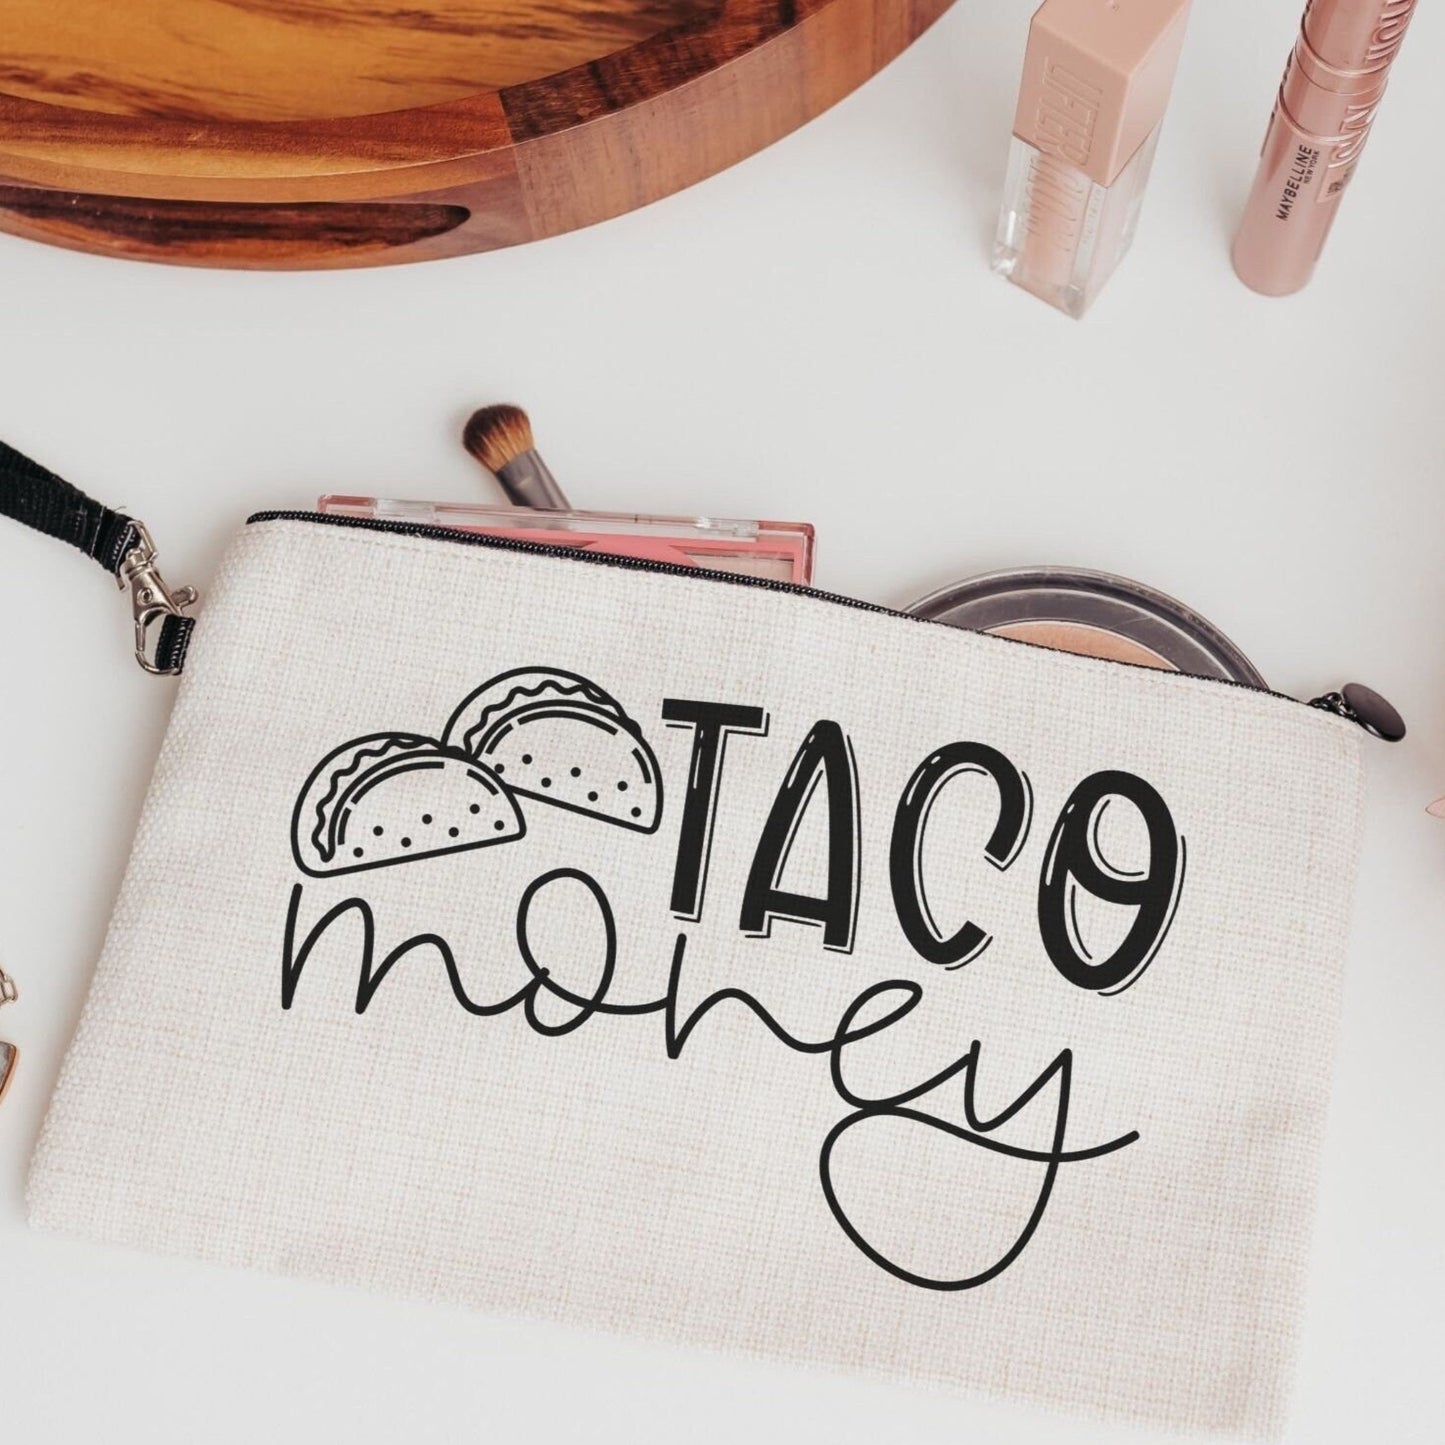 Taco Gifts for Teachers - A Unique and Humorous Present